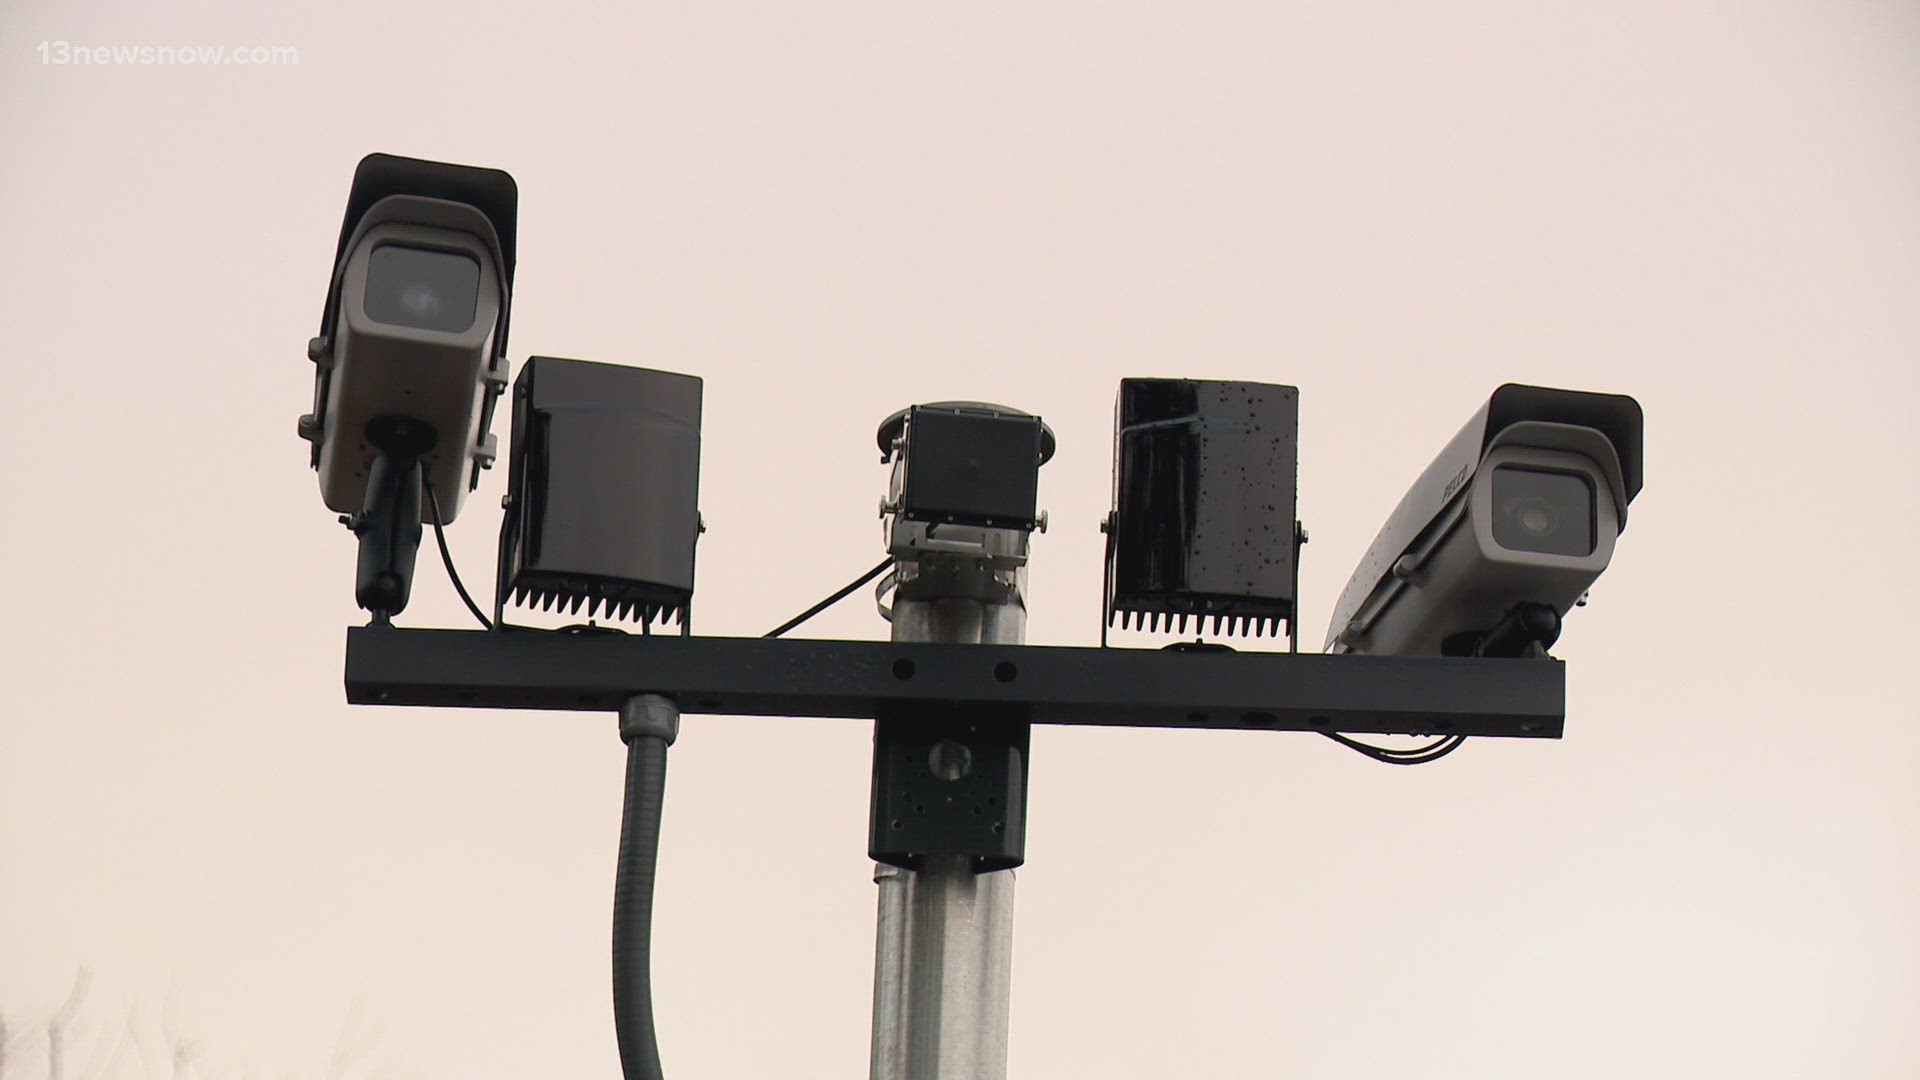 The city is introducing the final phase of automated traffic enforcement cameras. This initiative is part of a broader enforcement program introduced last year.